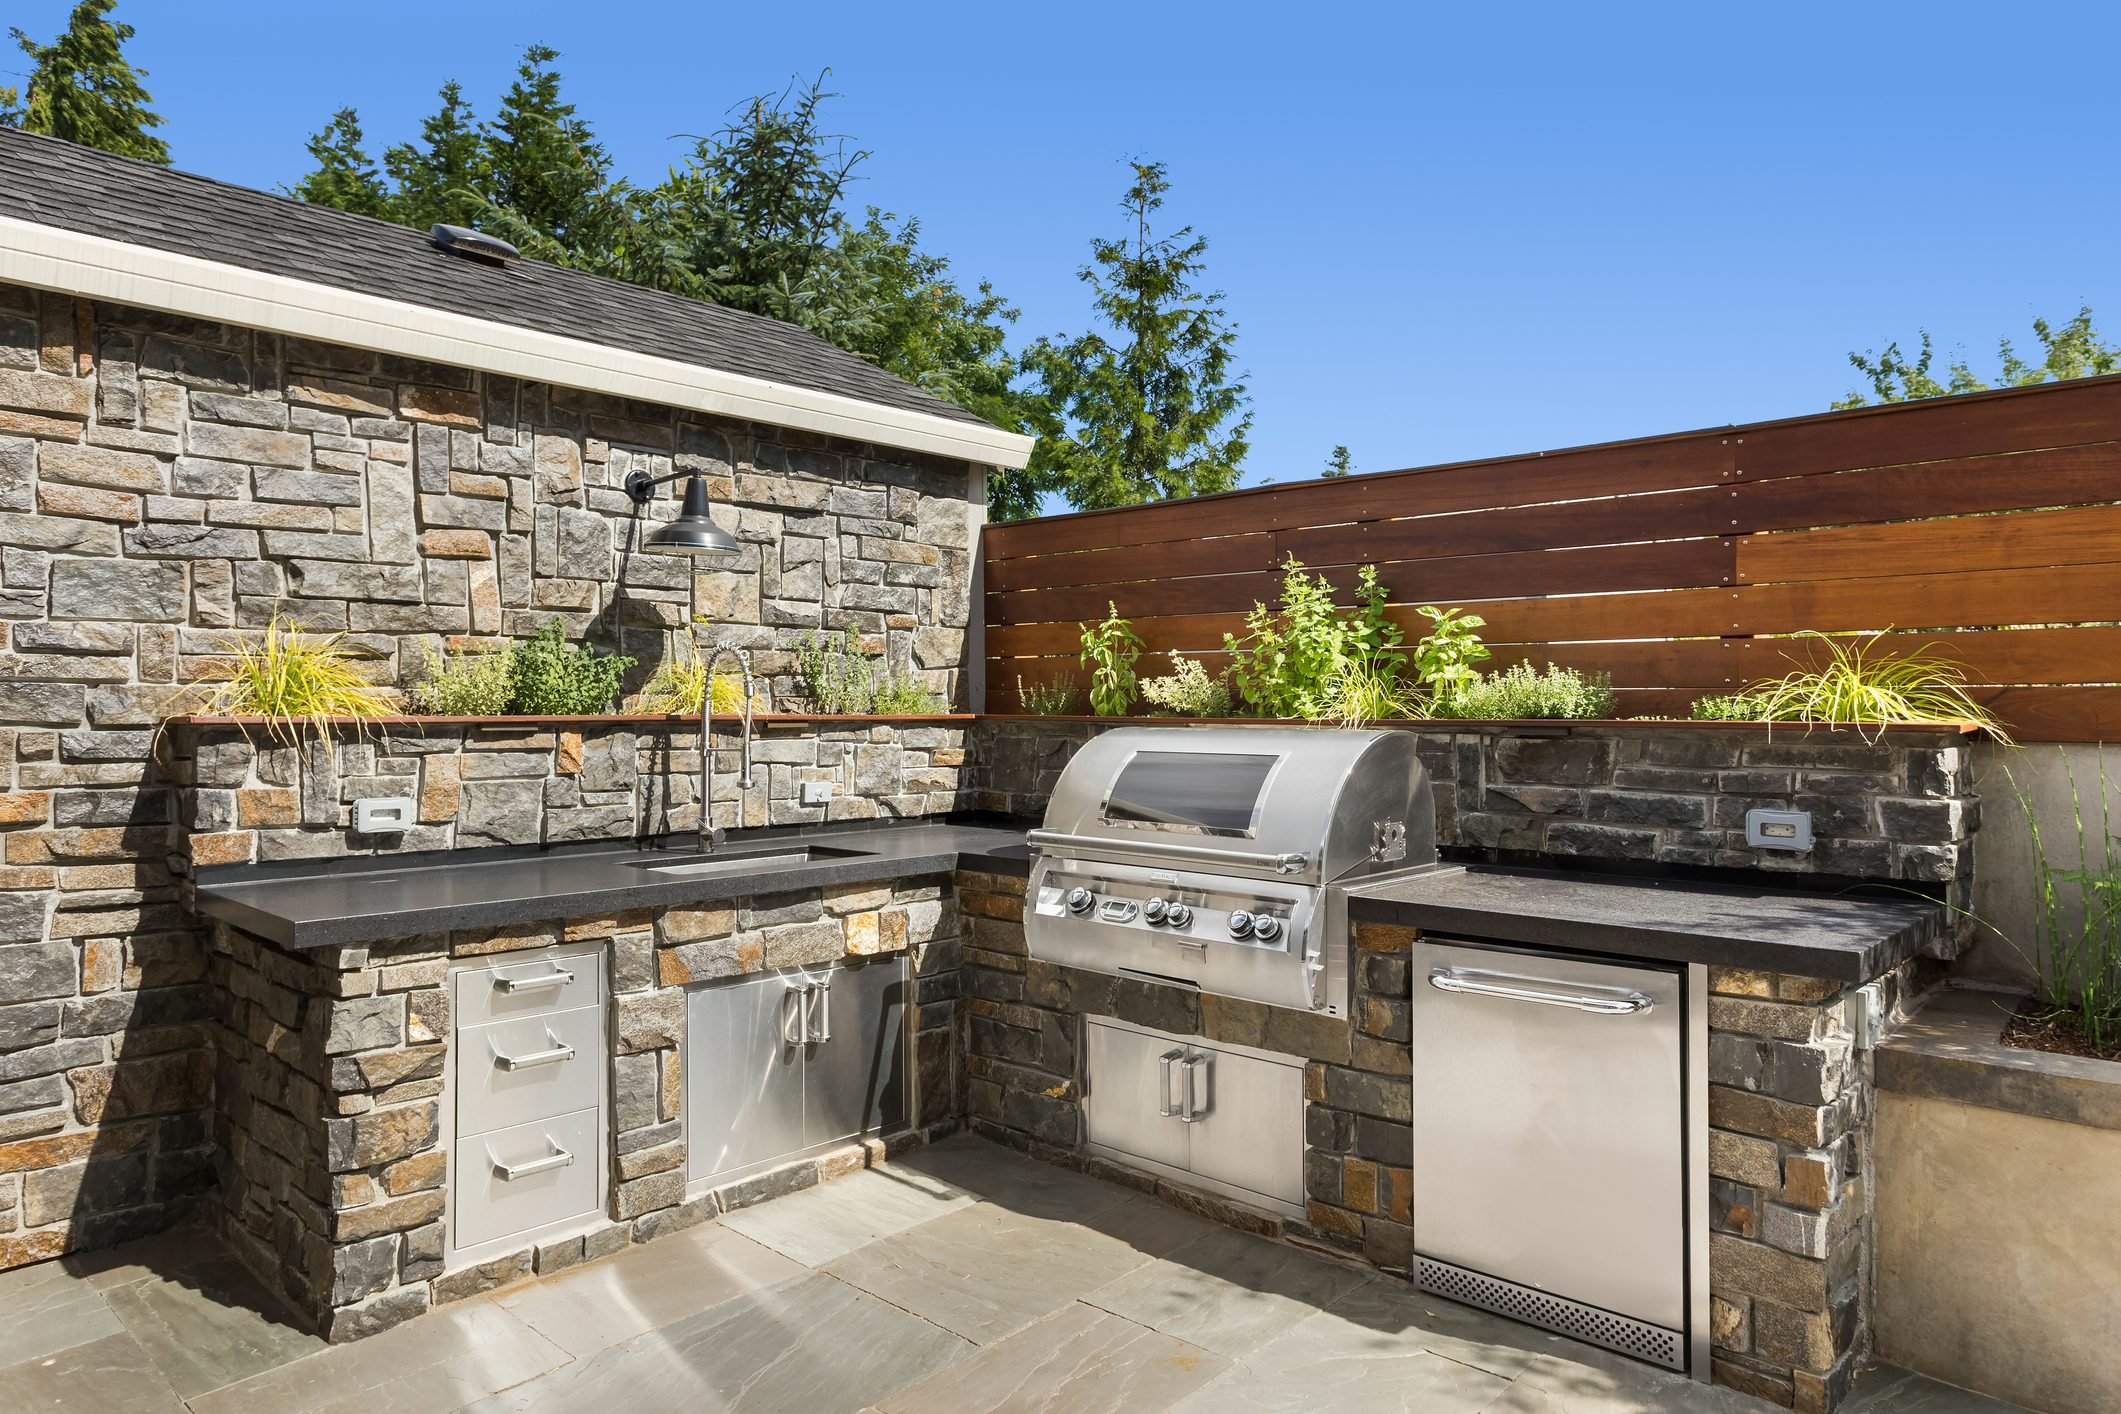 How Much Does an Outdoor Kitchen Cost?